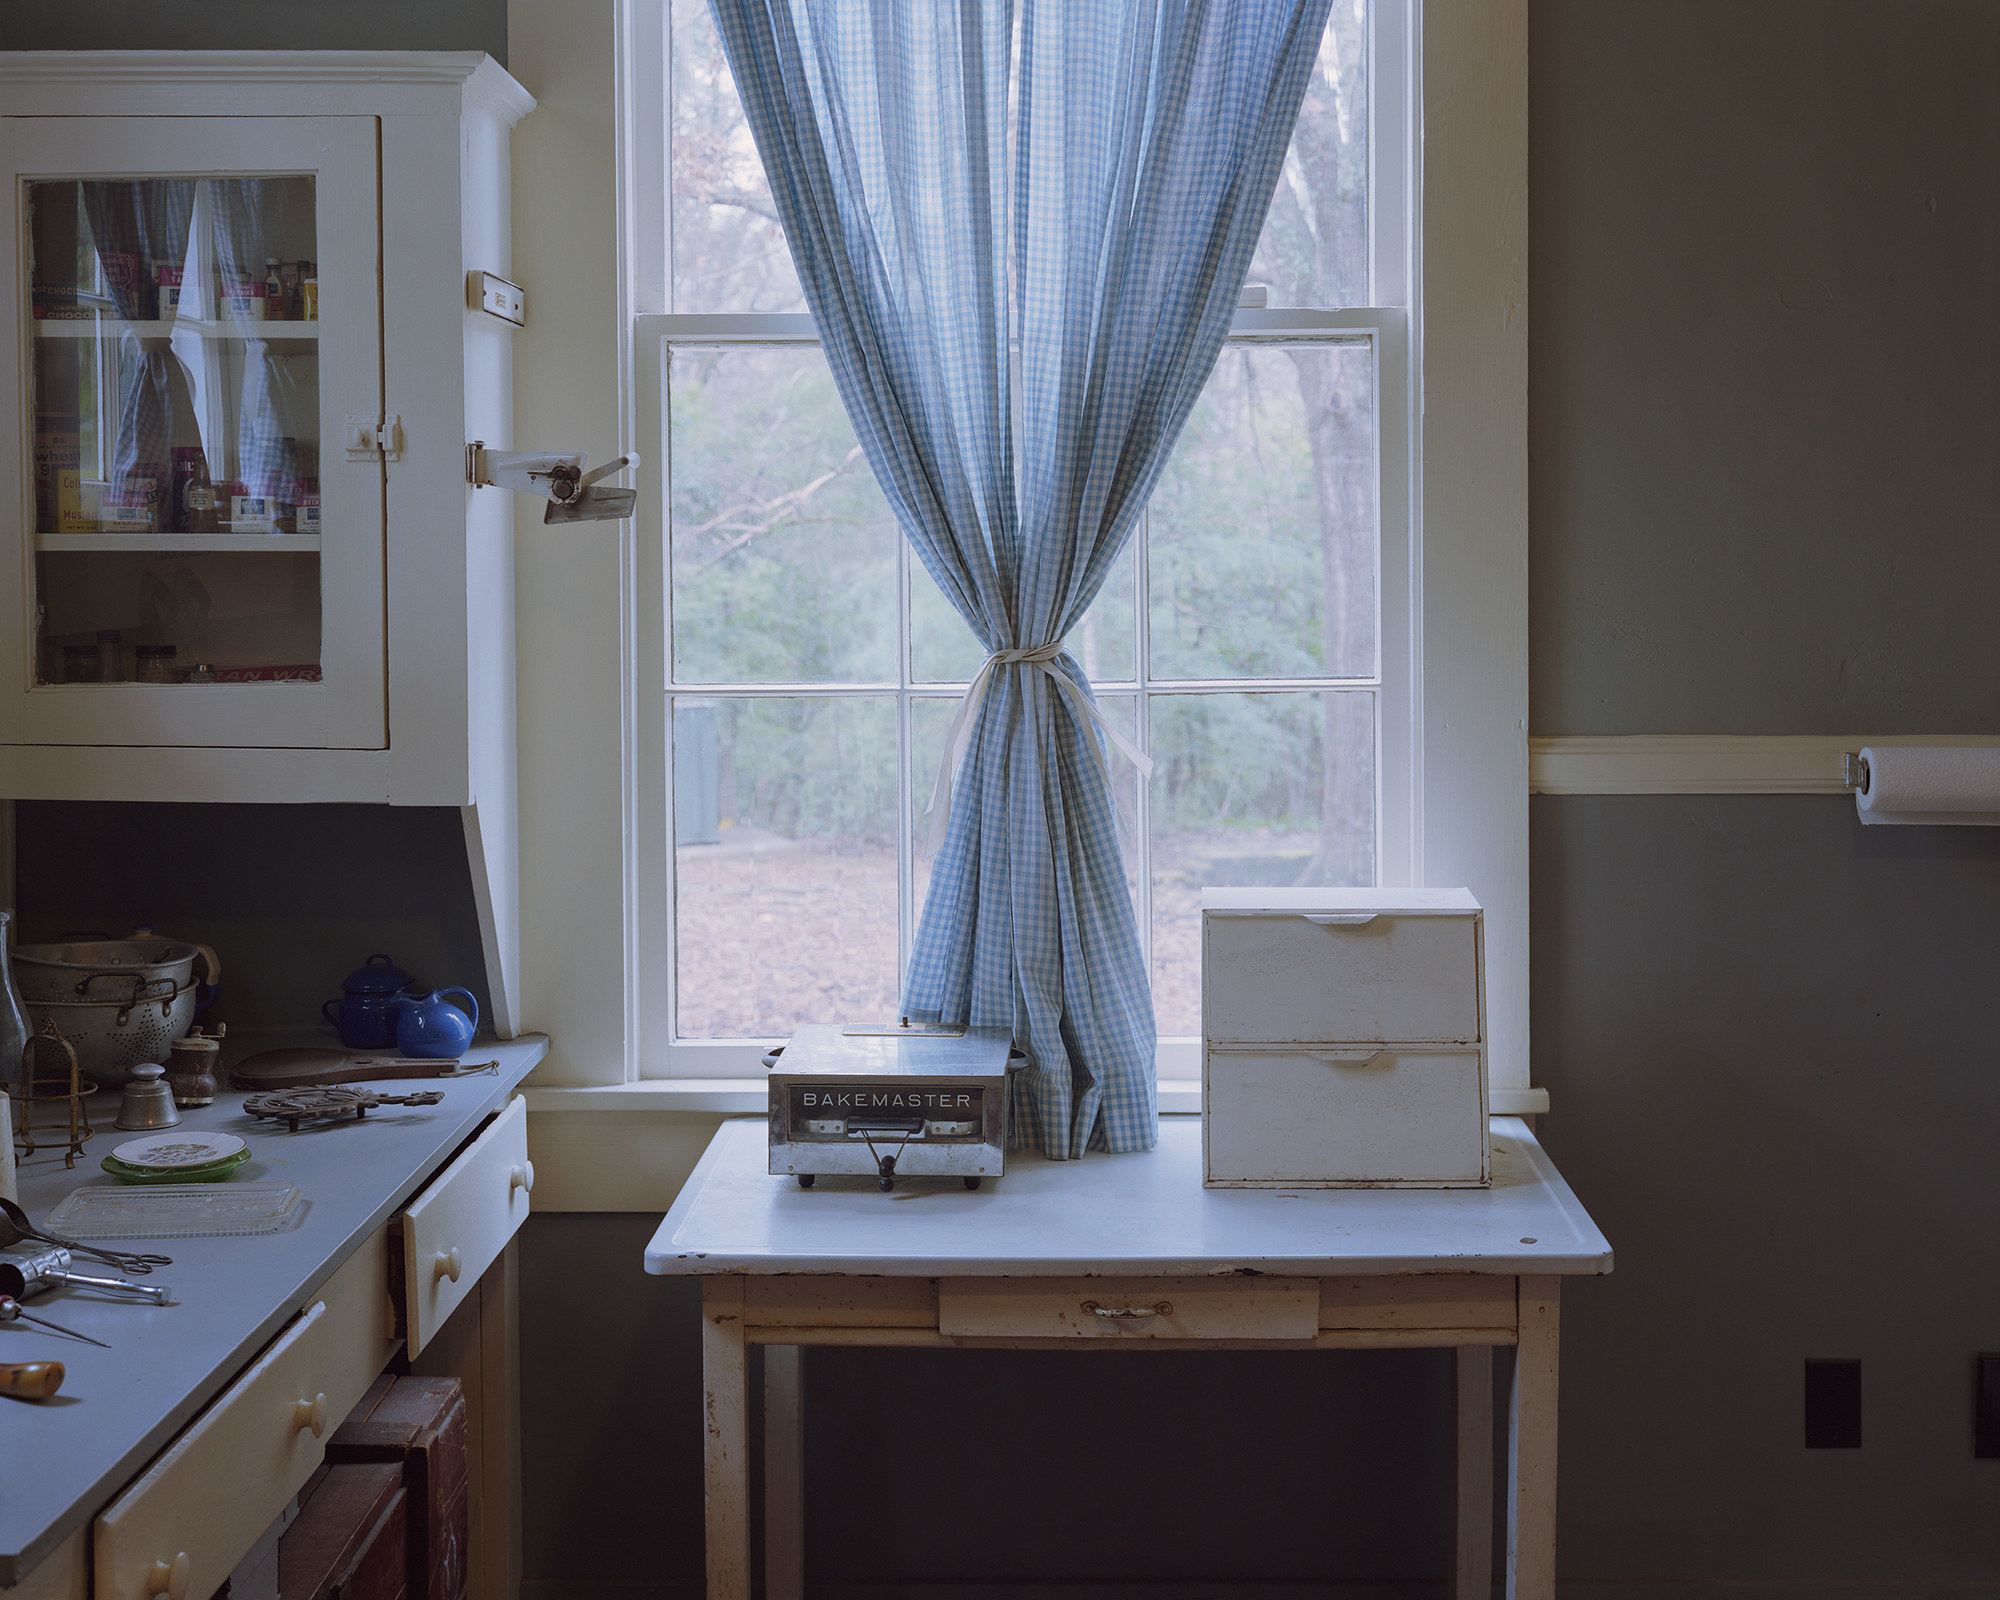 “William Faulkner’s Kitchen Curtains, Rowan Oak, Oxford, Mississippi, 2018”: an interior of a kitchen with curtains tied together